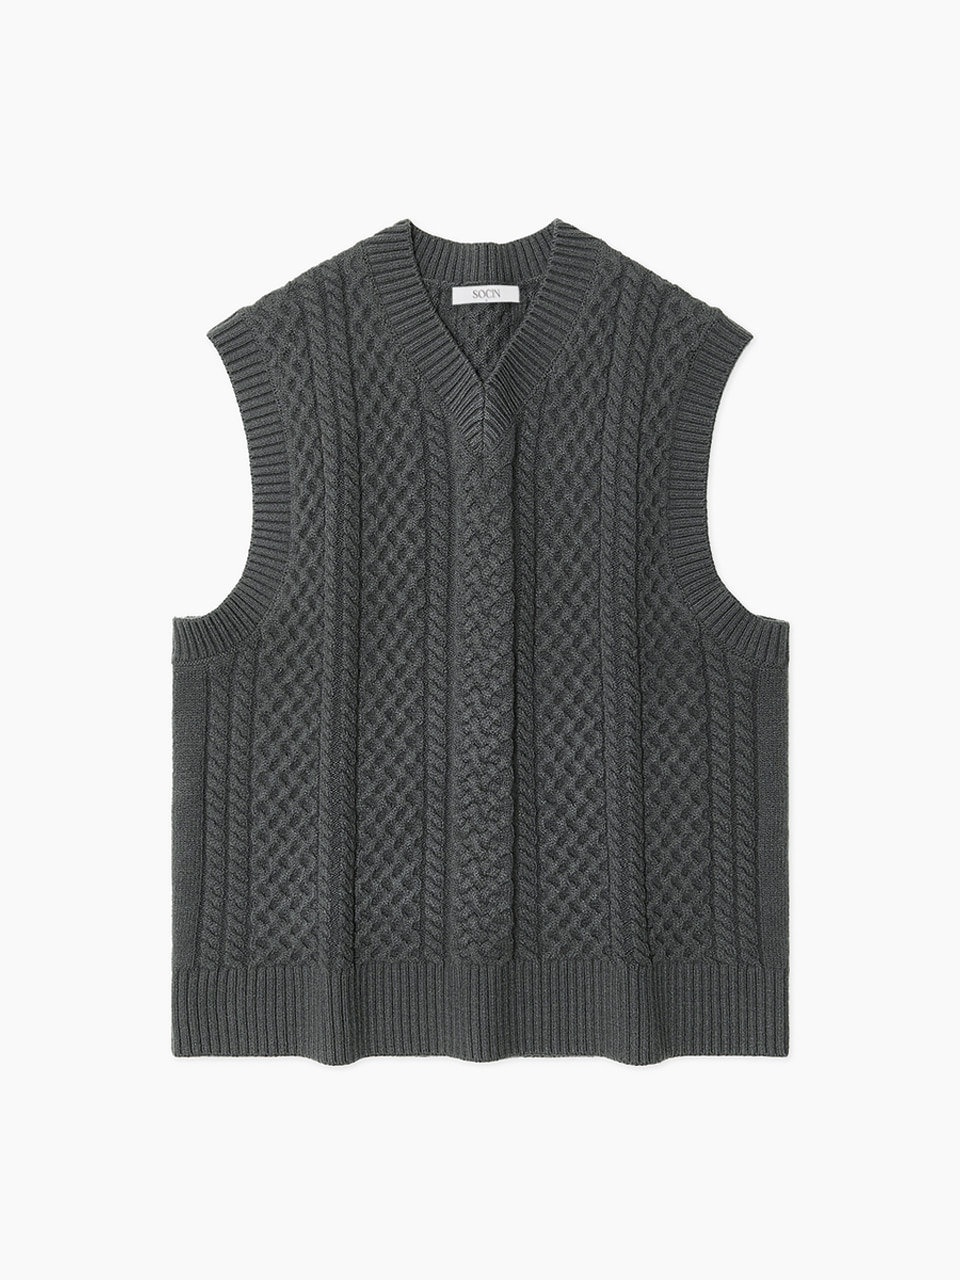 Wool Blended Cable Knit Vest (Charcoal)